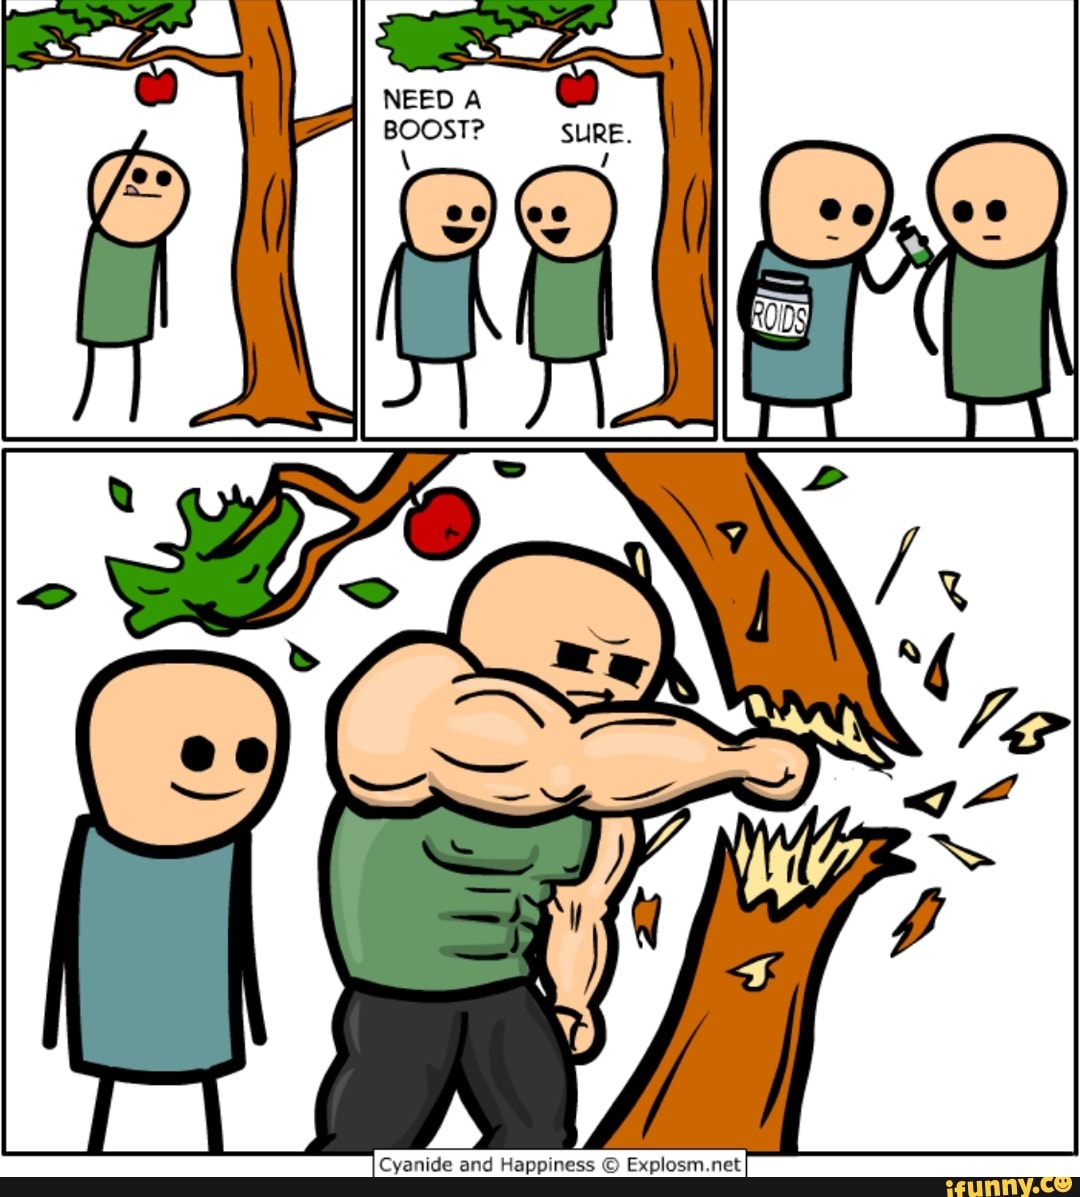 Cyanide and Happiness мемы